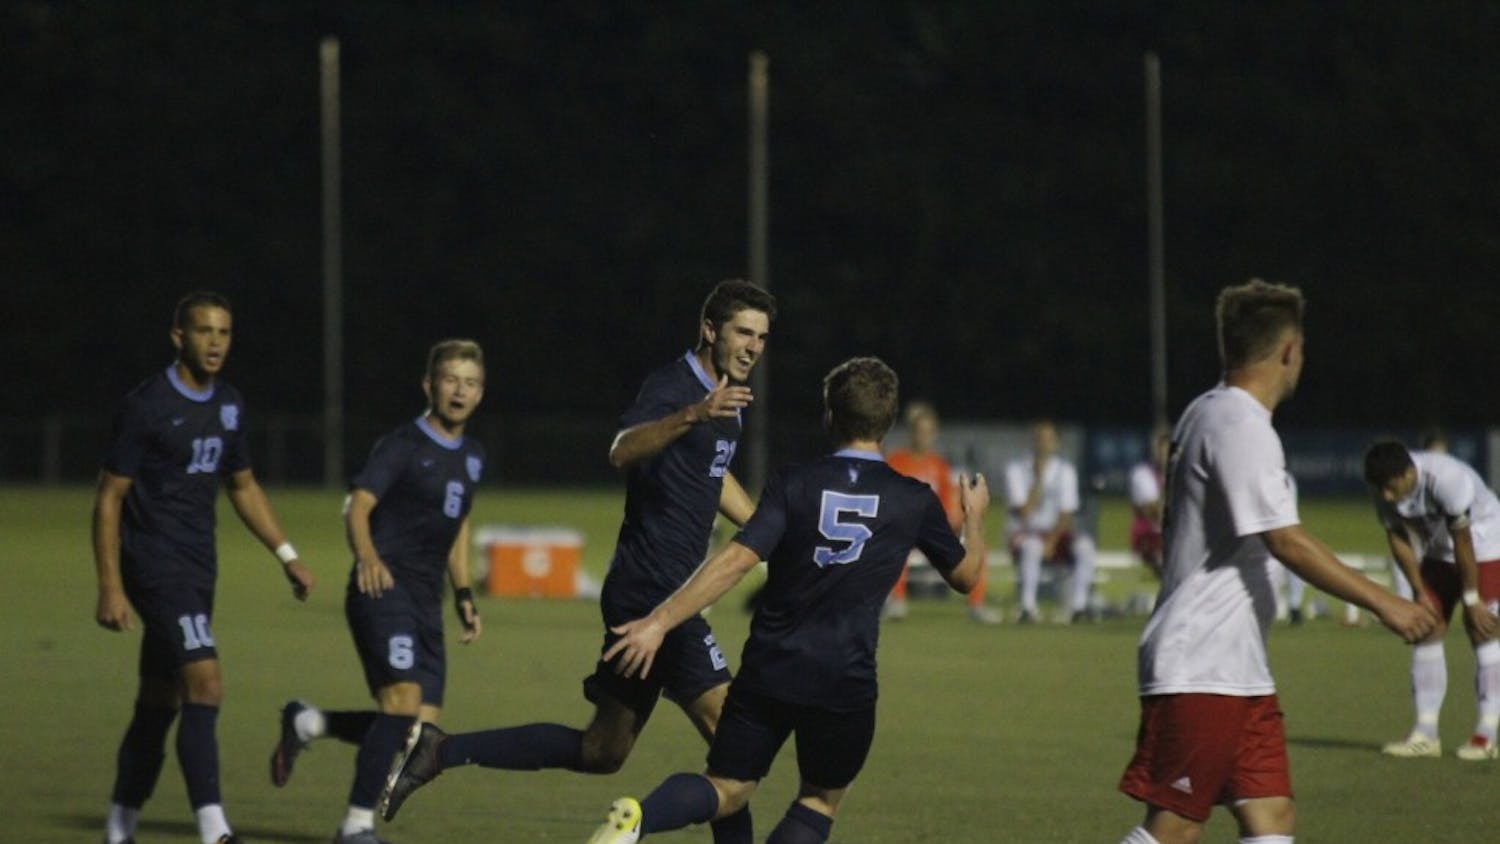 Alex Rose (21) celebrates a goal with teammate John Nelson (5). The North Carolina men's soccer team defeated Rutgers, 6-1, on Sunday night in Cary.